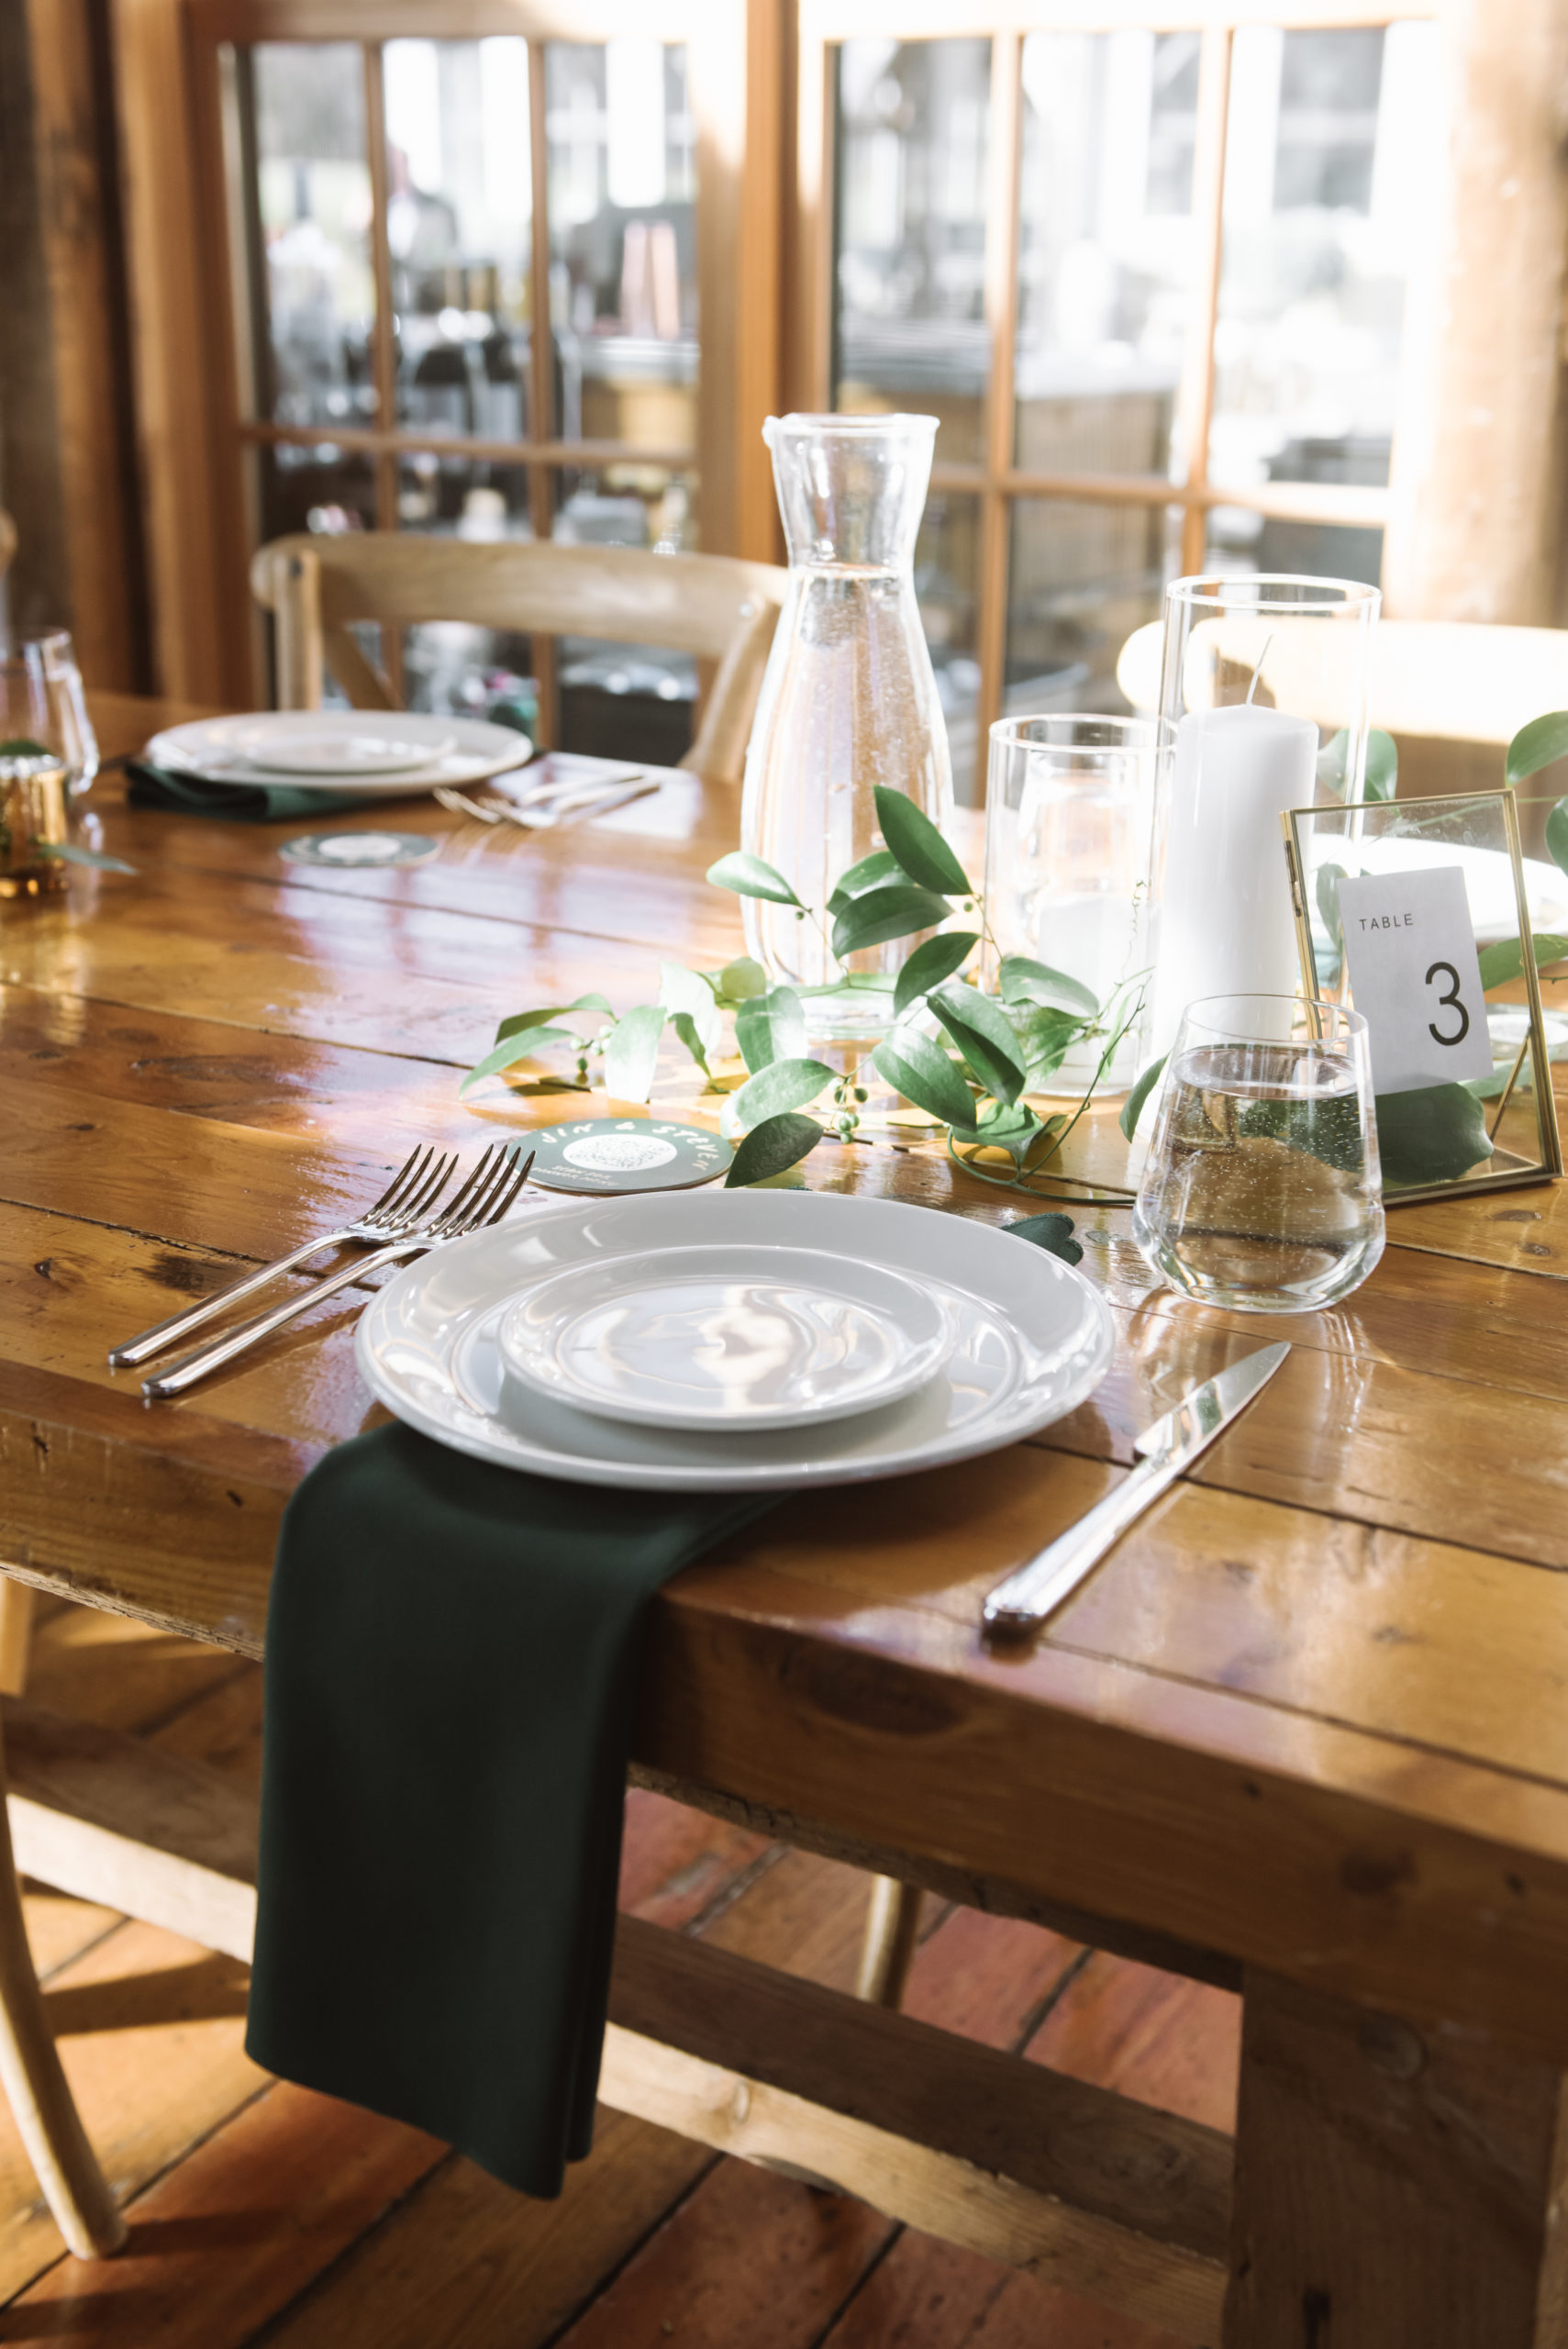 An individual place setting comprised of two white plates on top of one another flanked by two forks and one knife. There is a dark green napkin below the plates. There is greenery as part of the centerpiece and the table is made of wood. The sun is shining brightly in the background.